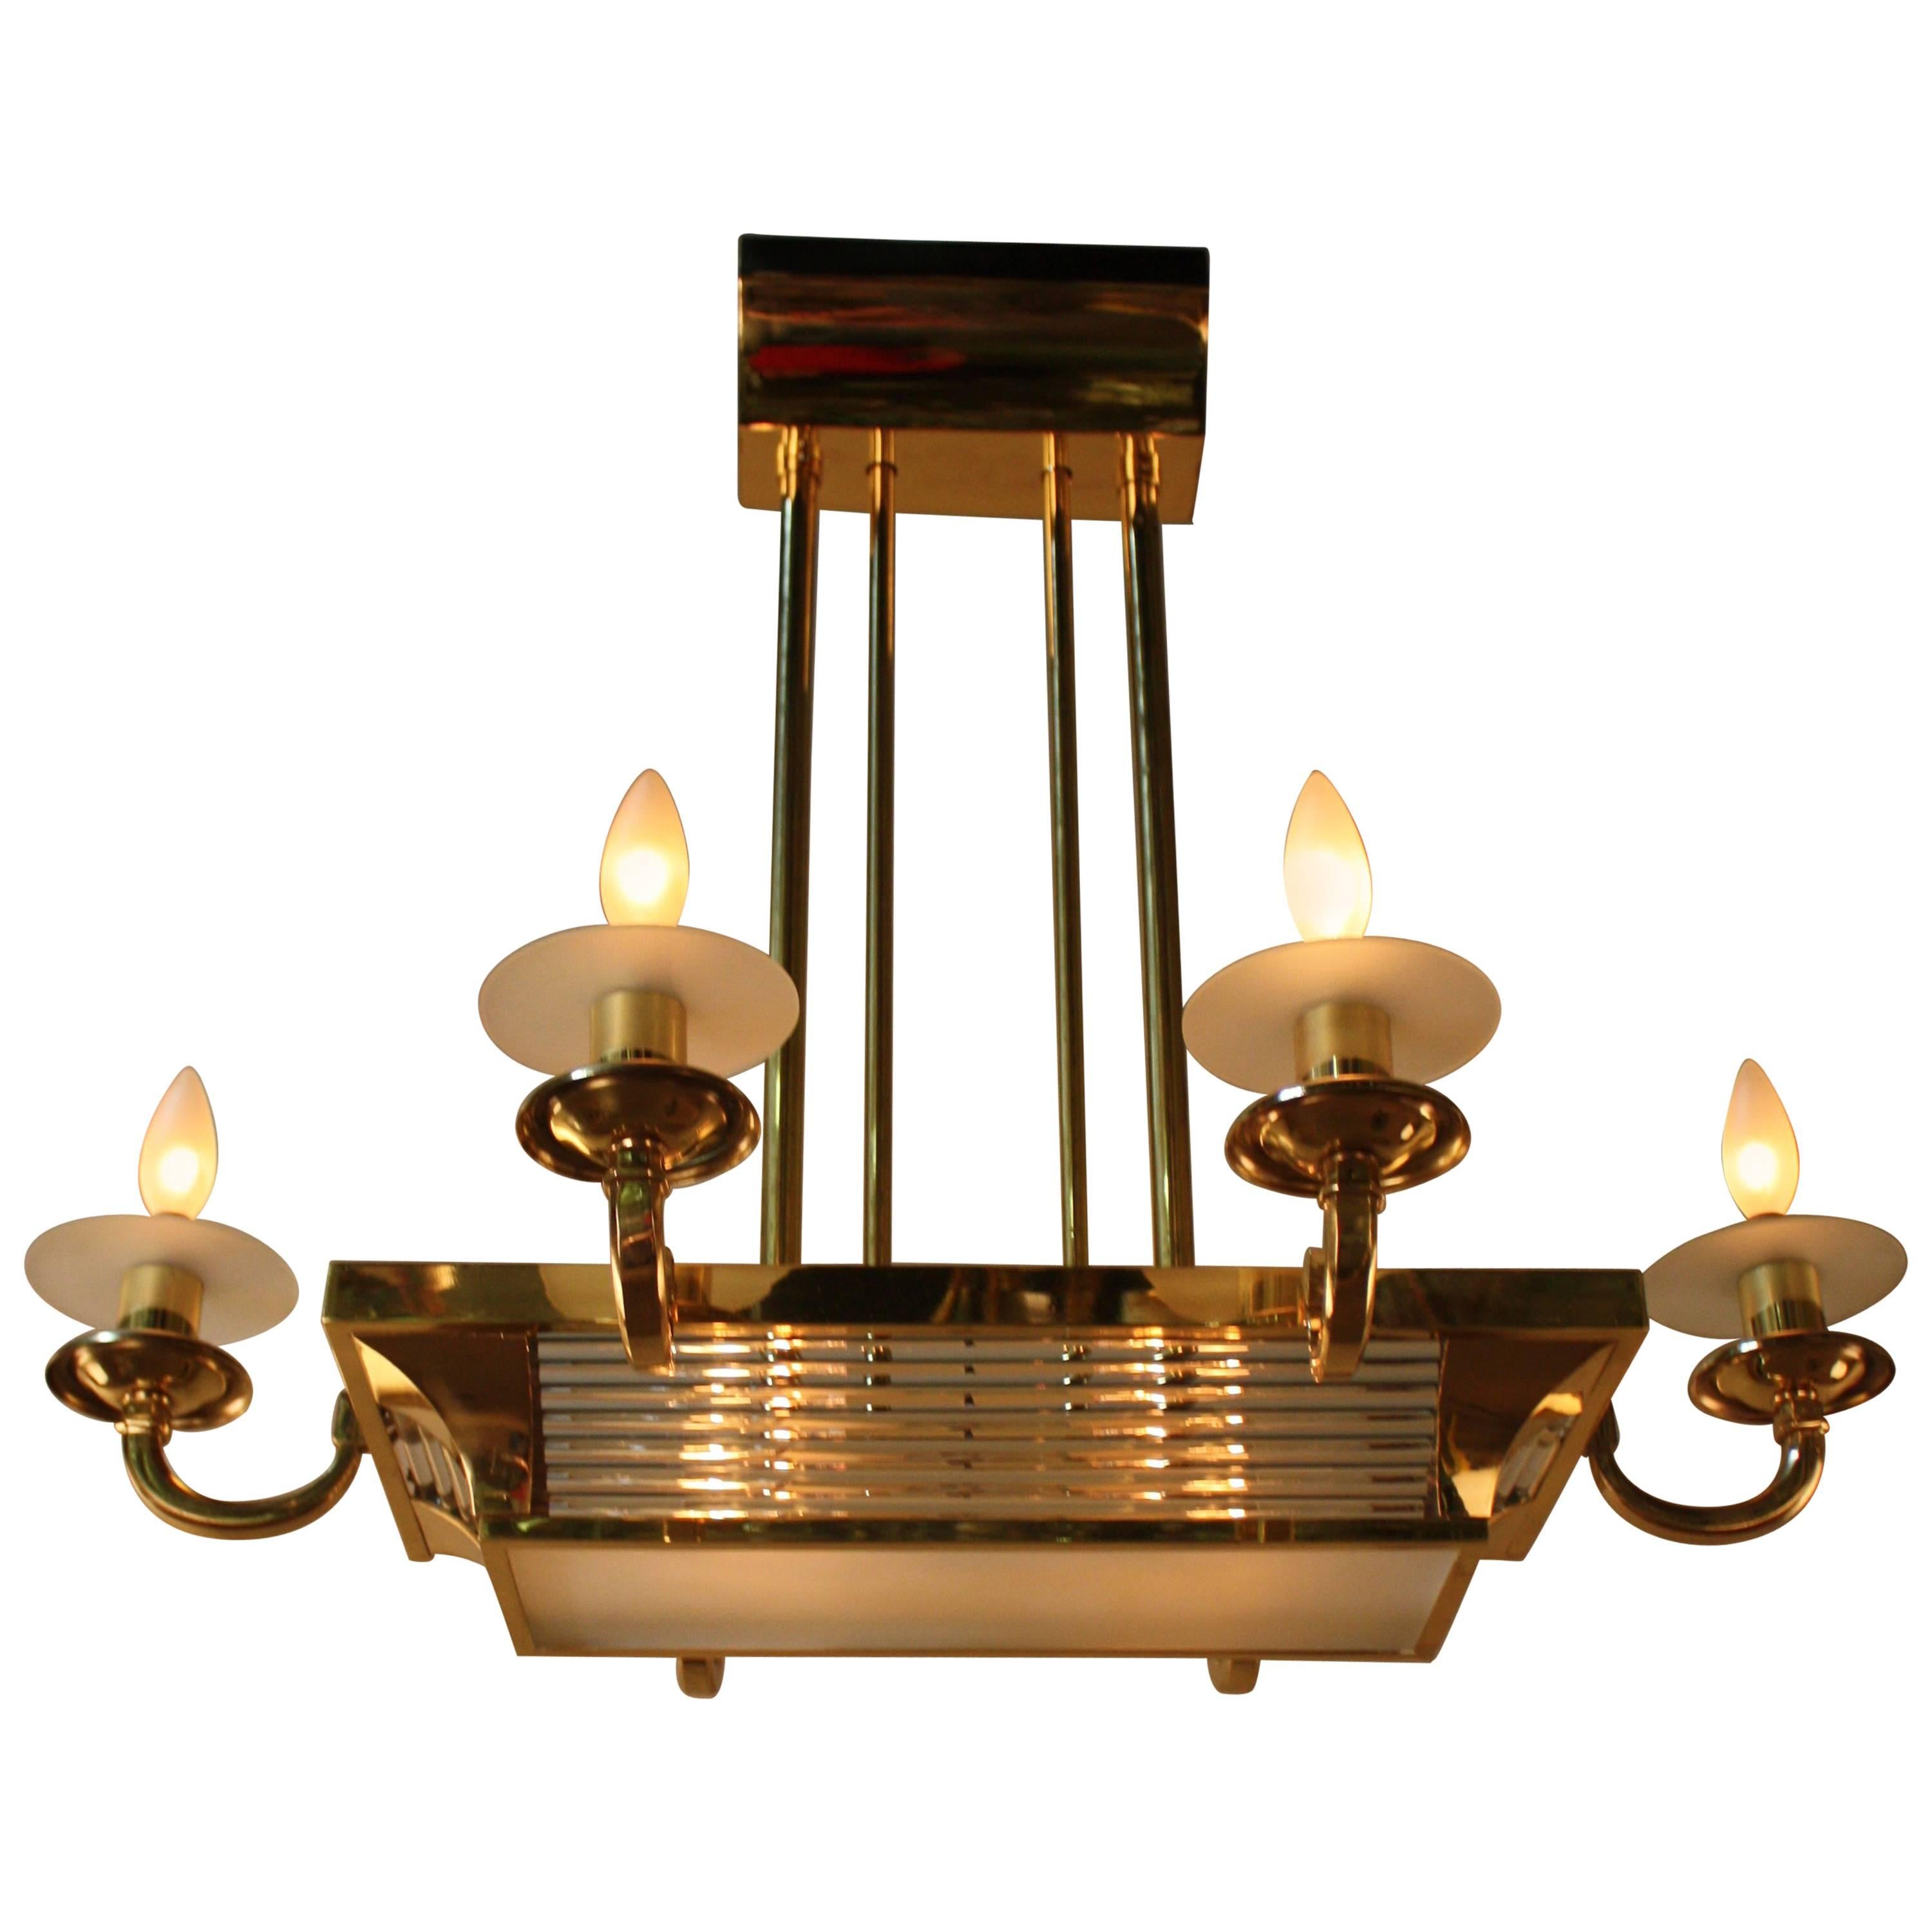 French Art Deco Chandelier by Petitot